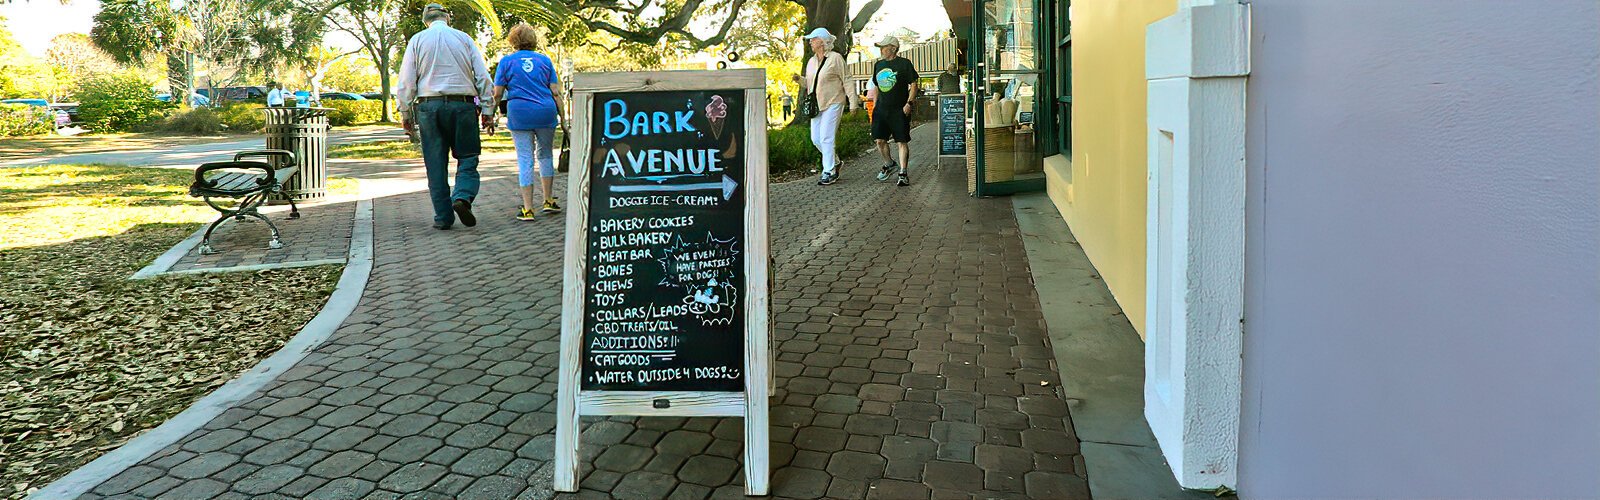 Dunedin has plenty of dog-friendly shops such as Bark Avenue that offer all kinds of items, food and services for the beloved canines.